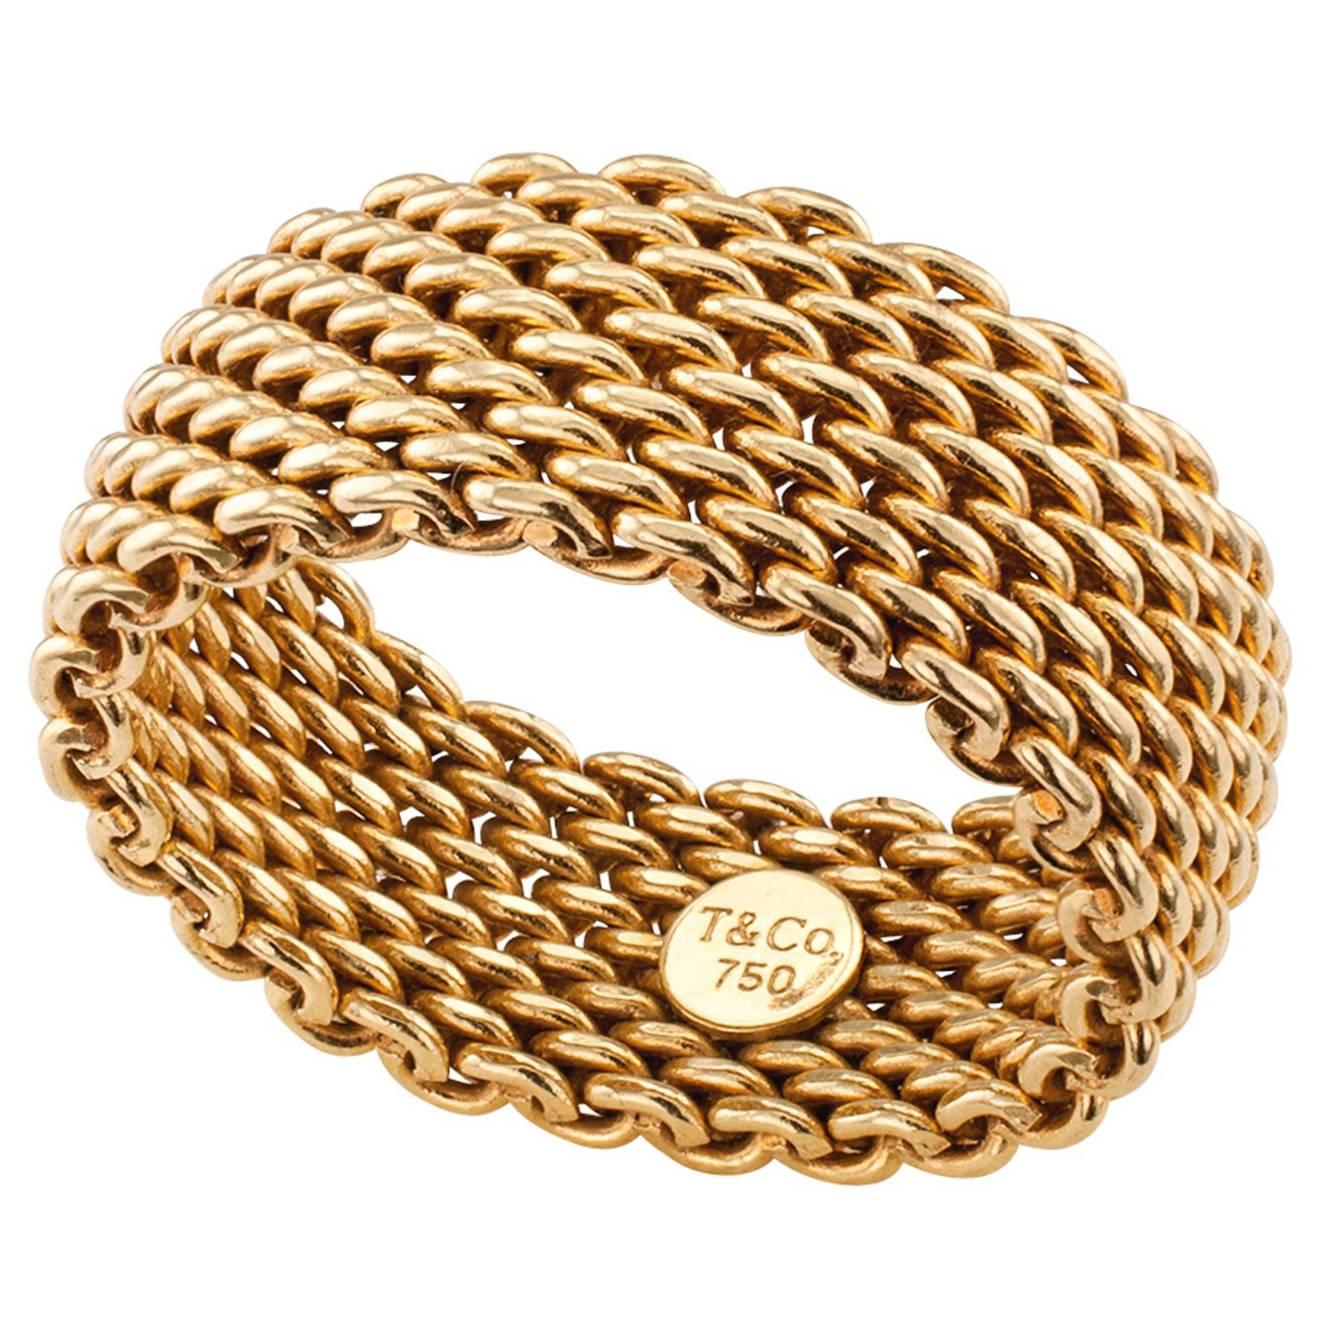 Tiffany & Co. Woven Gold Ring Band